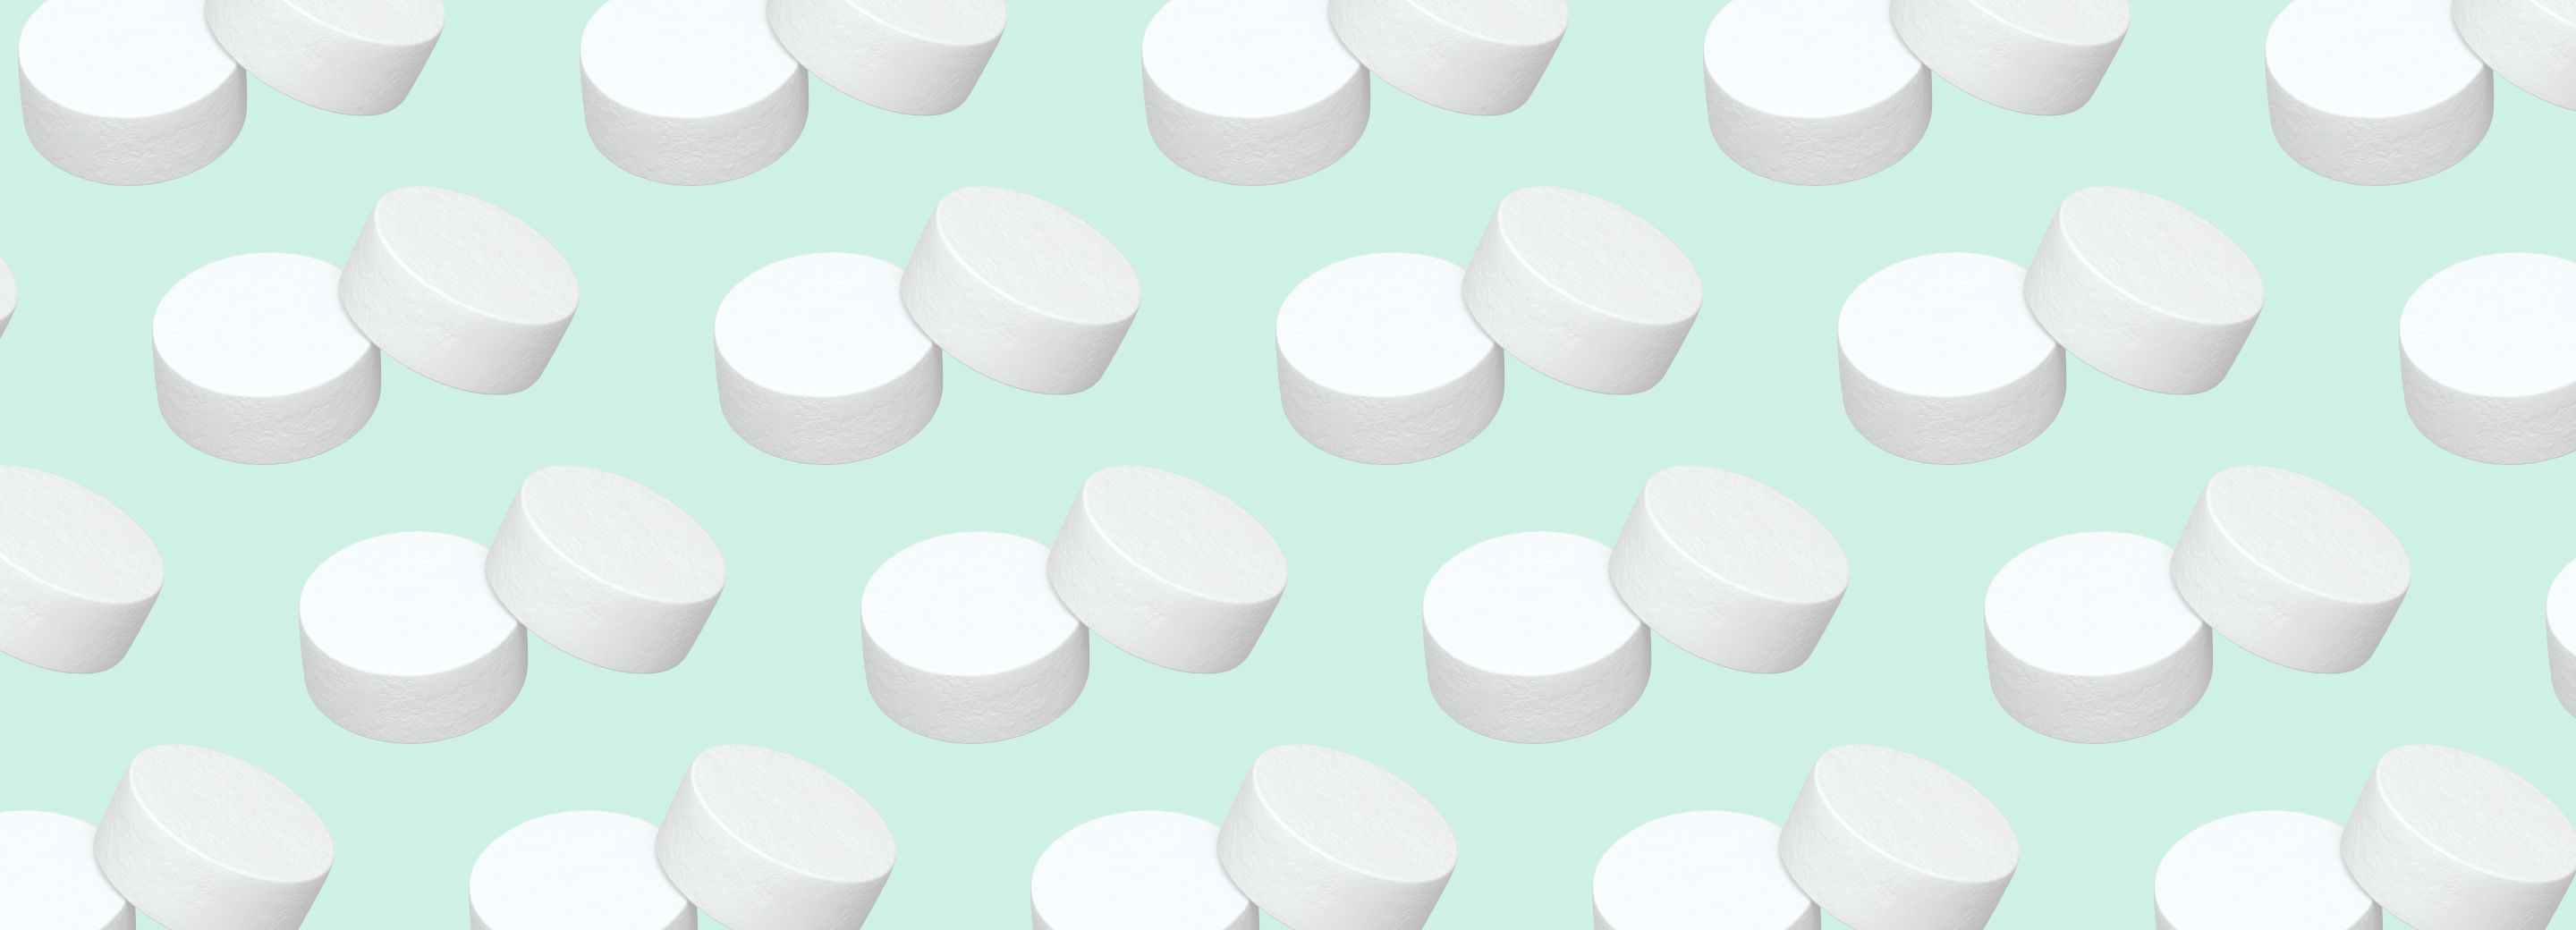 Pairs of Altoid mints repeated in a pattern on a mint green background